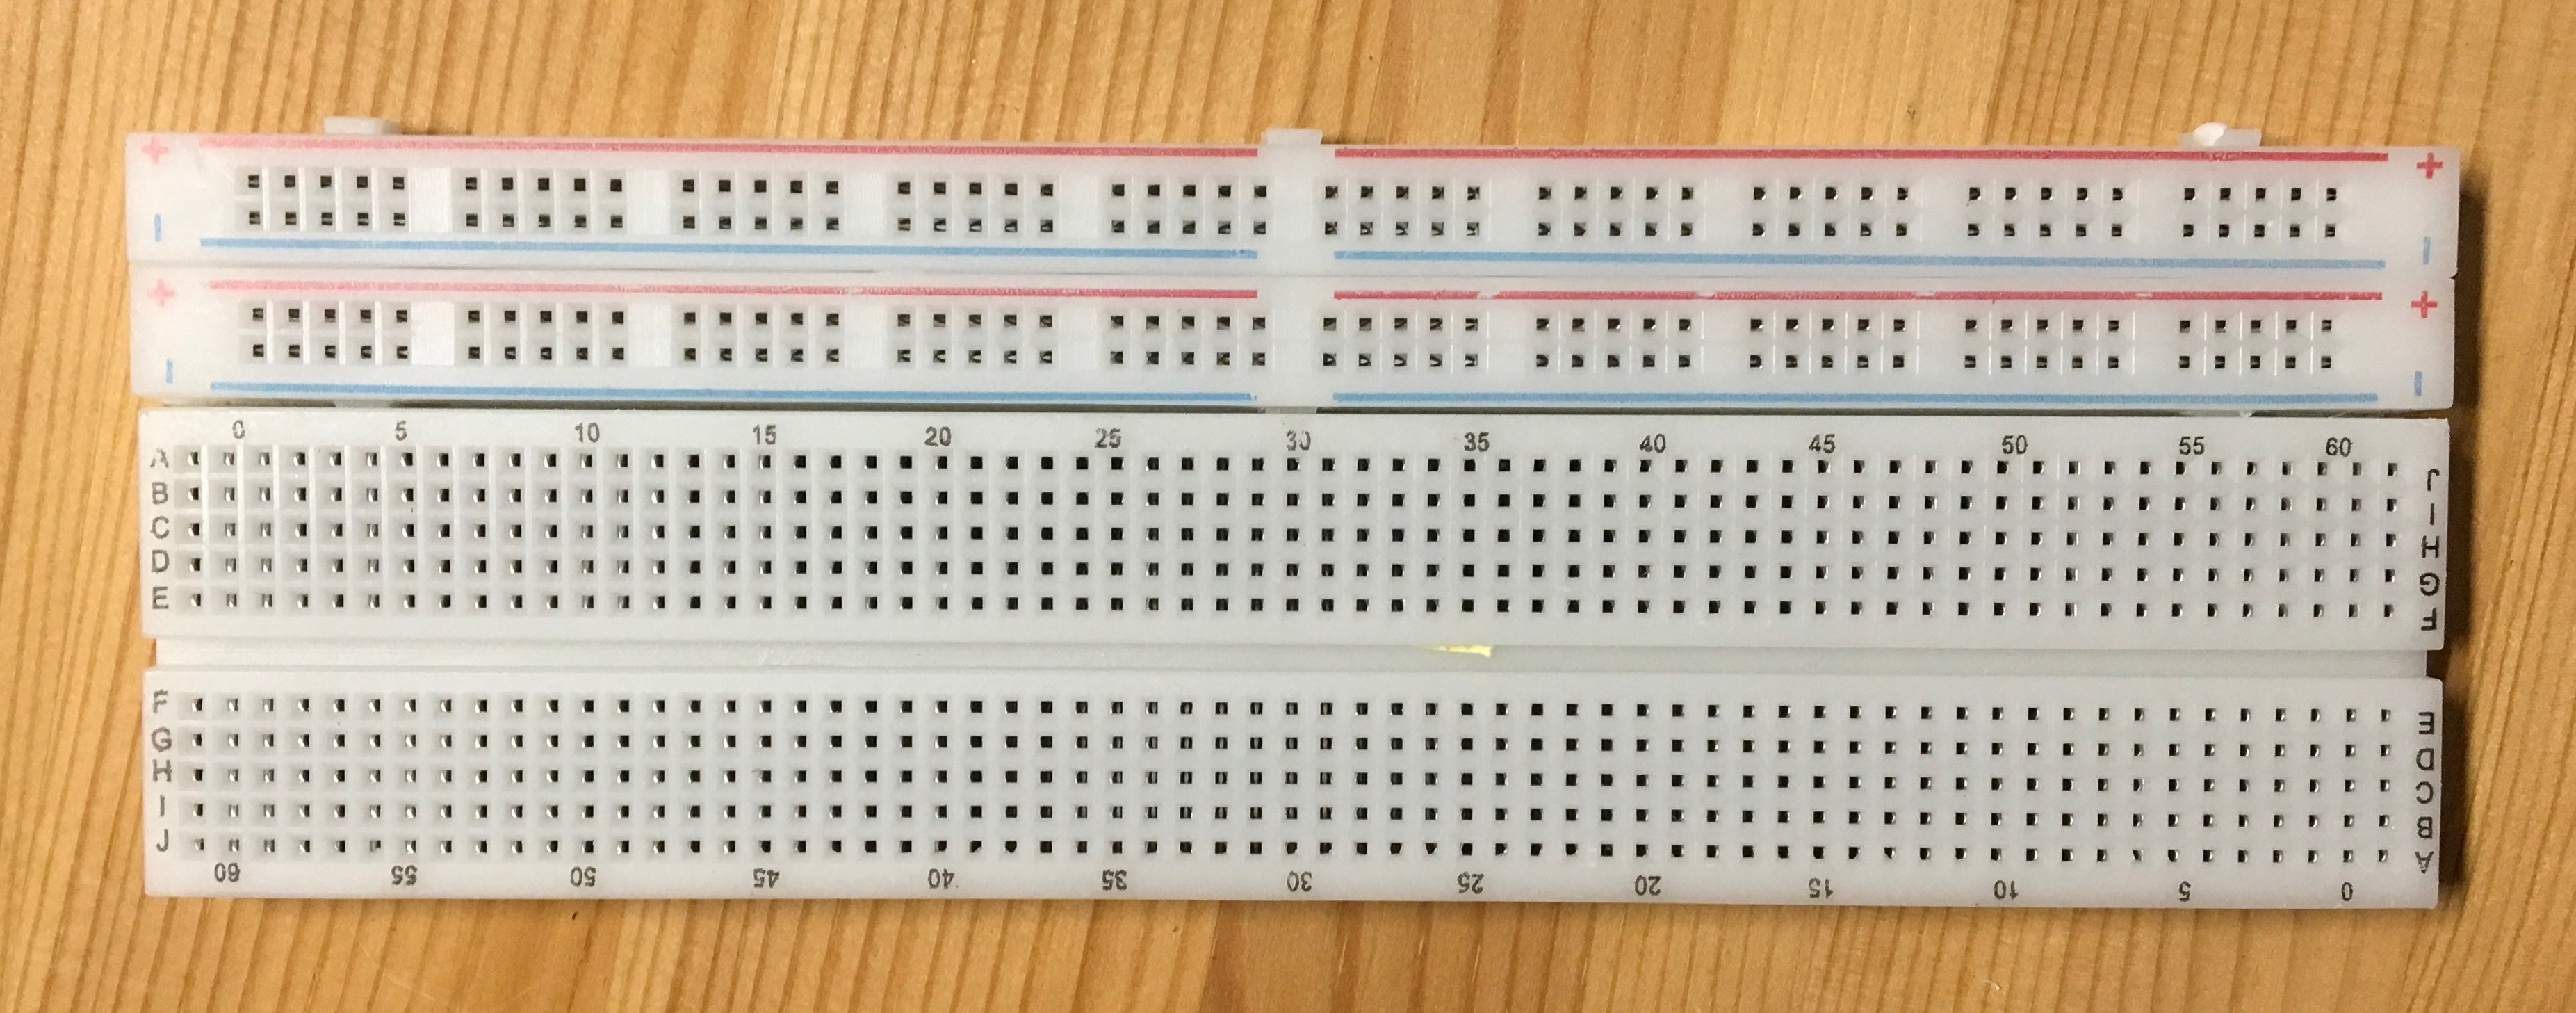 Reconfigurable / Extendable Solderless Breadboard, 830 Tie Points - Server On The Move